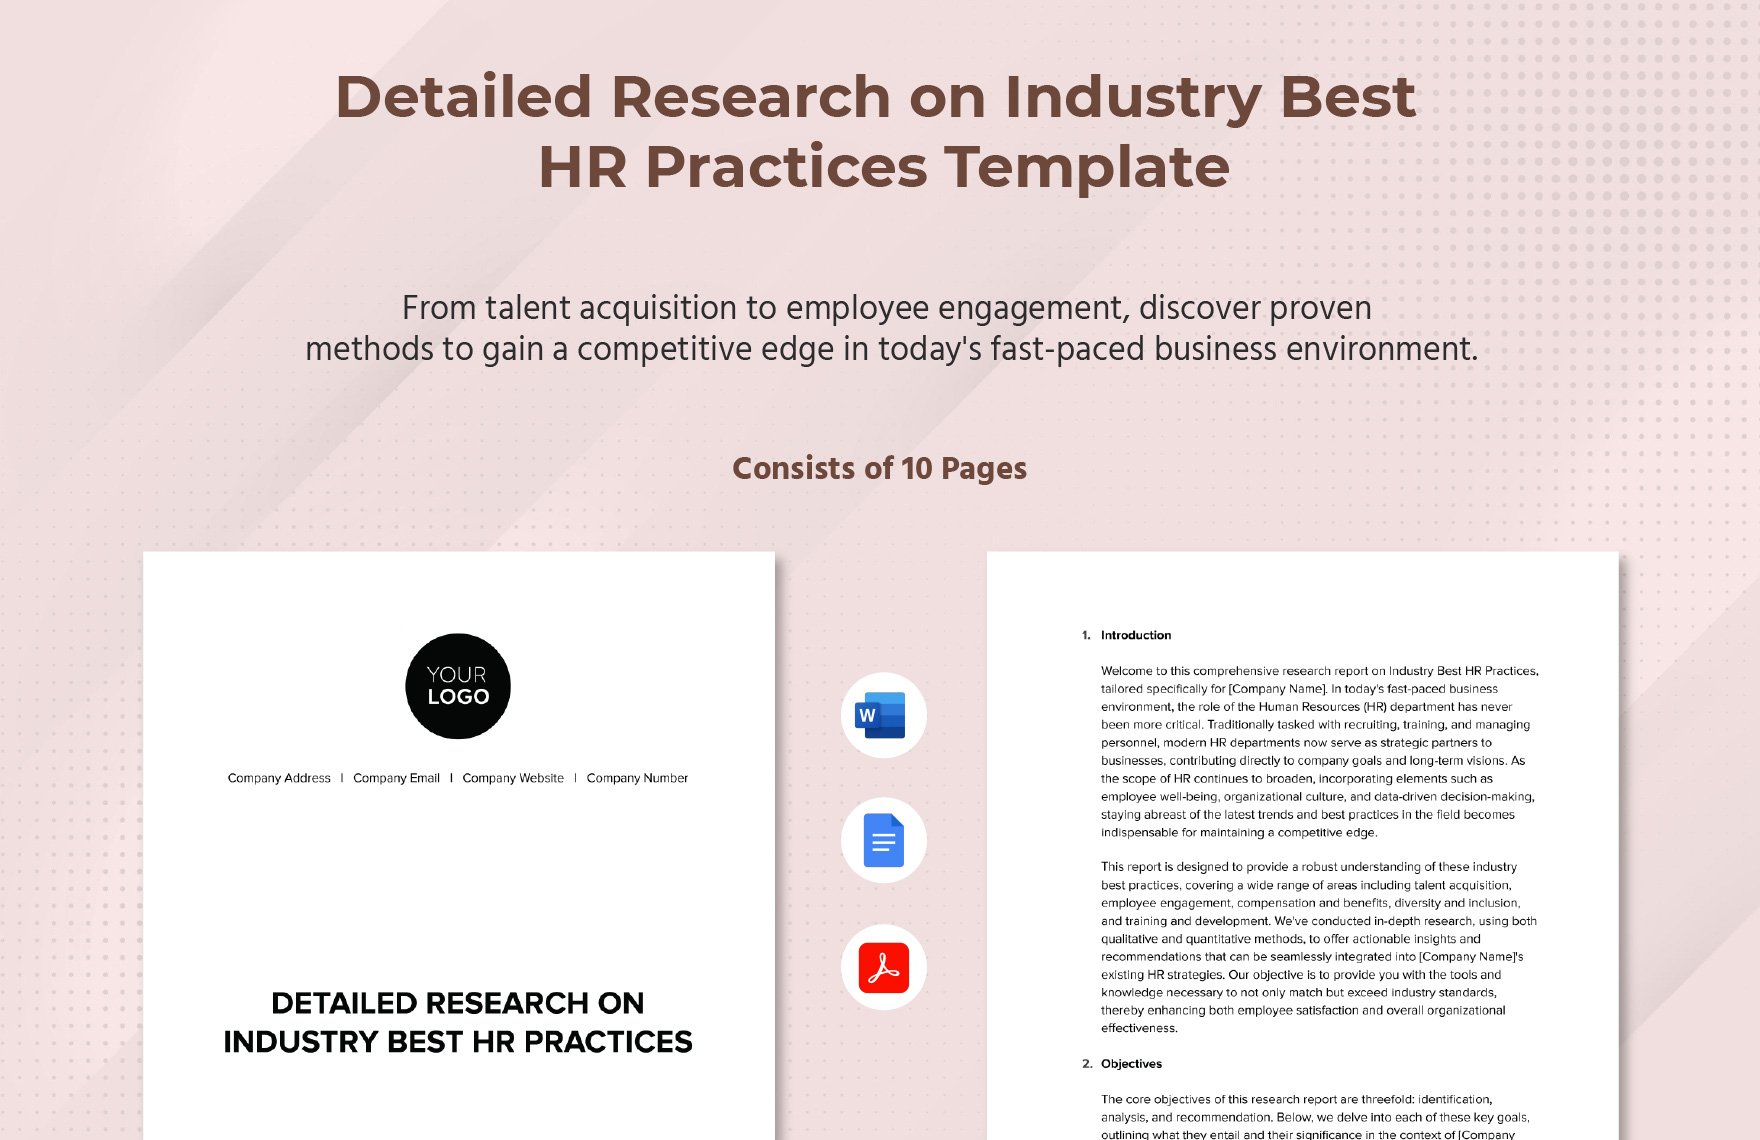 Detailed Research on Industry Best HR Practices HR Template